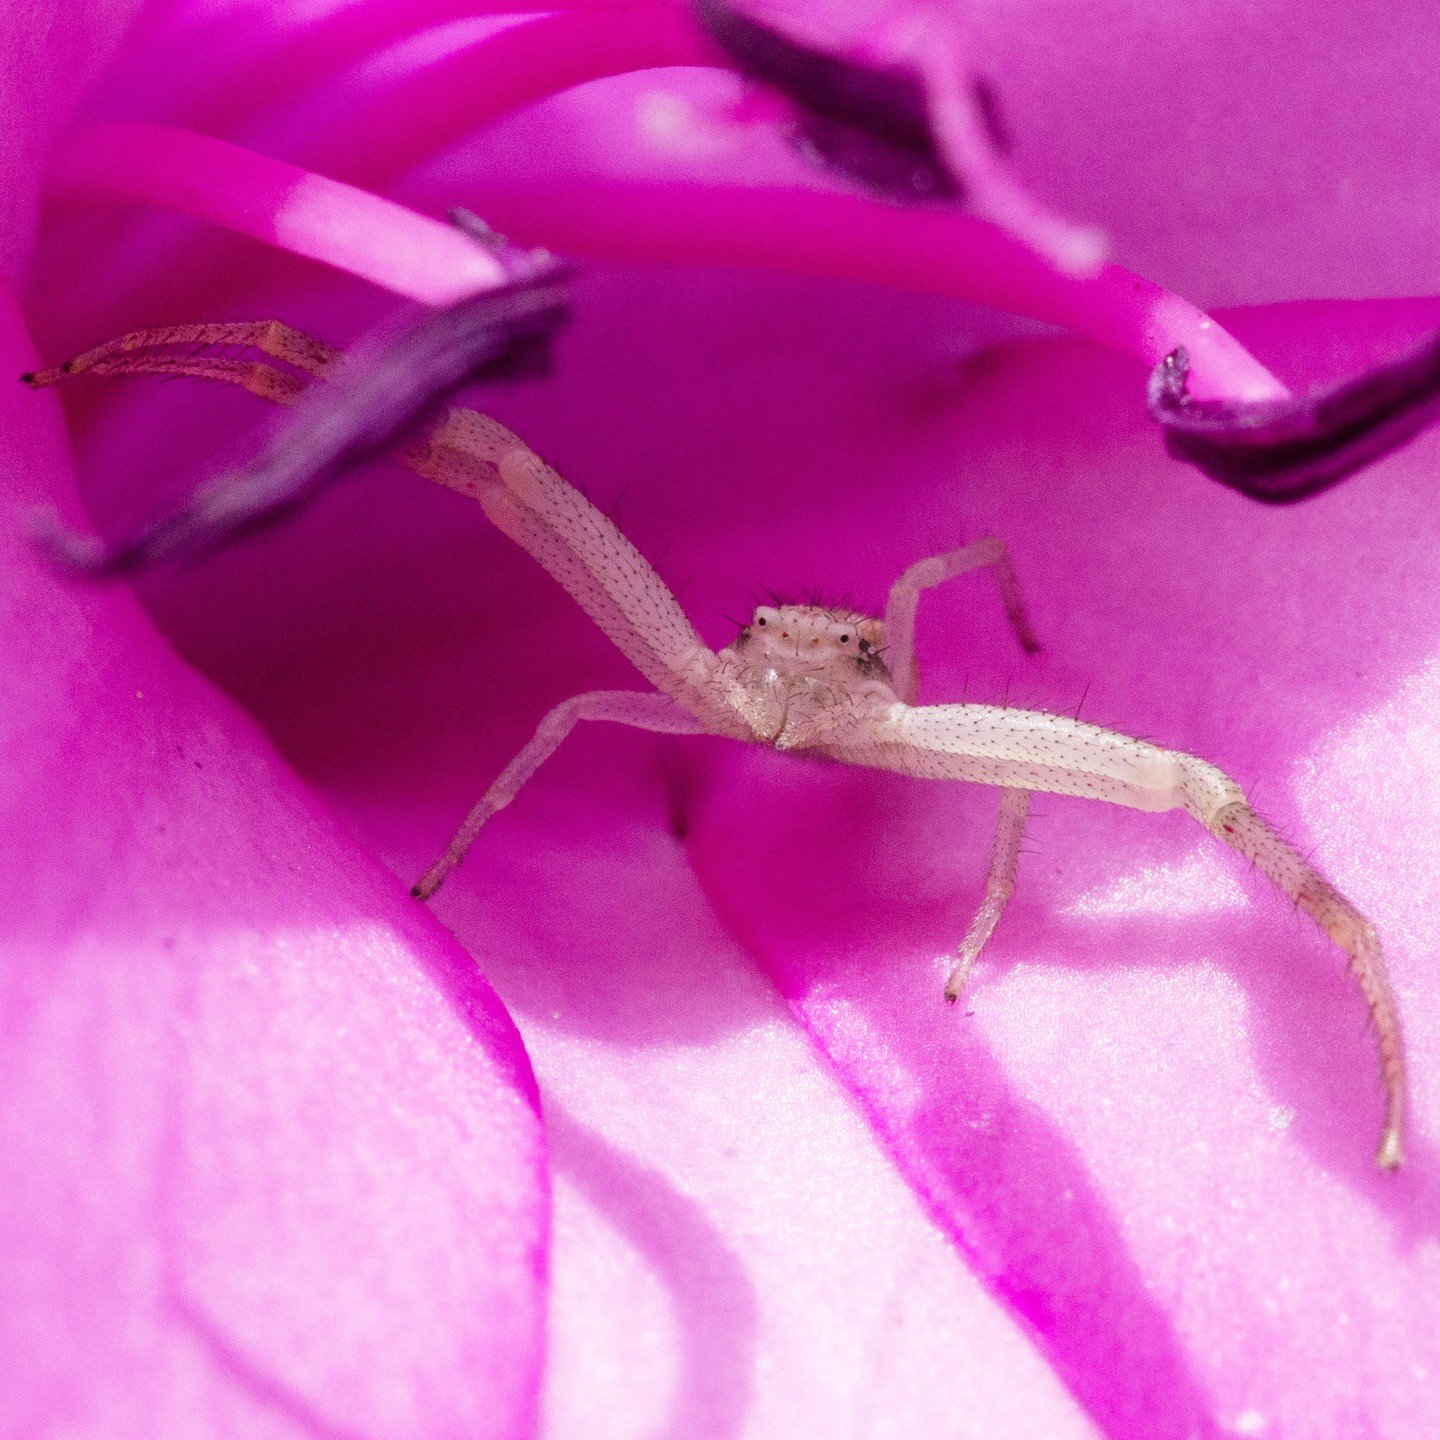 The Watsonia bulbs are in bloom at Taft Gardens, and this Flower Crab Spider is loving it! 

Watsonia is a genus of plants in the family Iridaceae, subfamily Crocoideae. Watsonias are native to South Africa and are named after Sir William Watson, an 